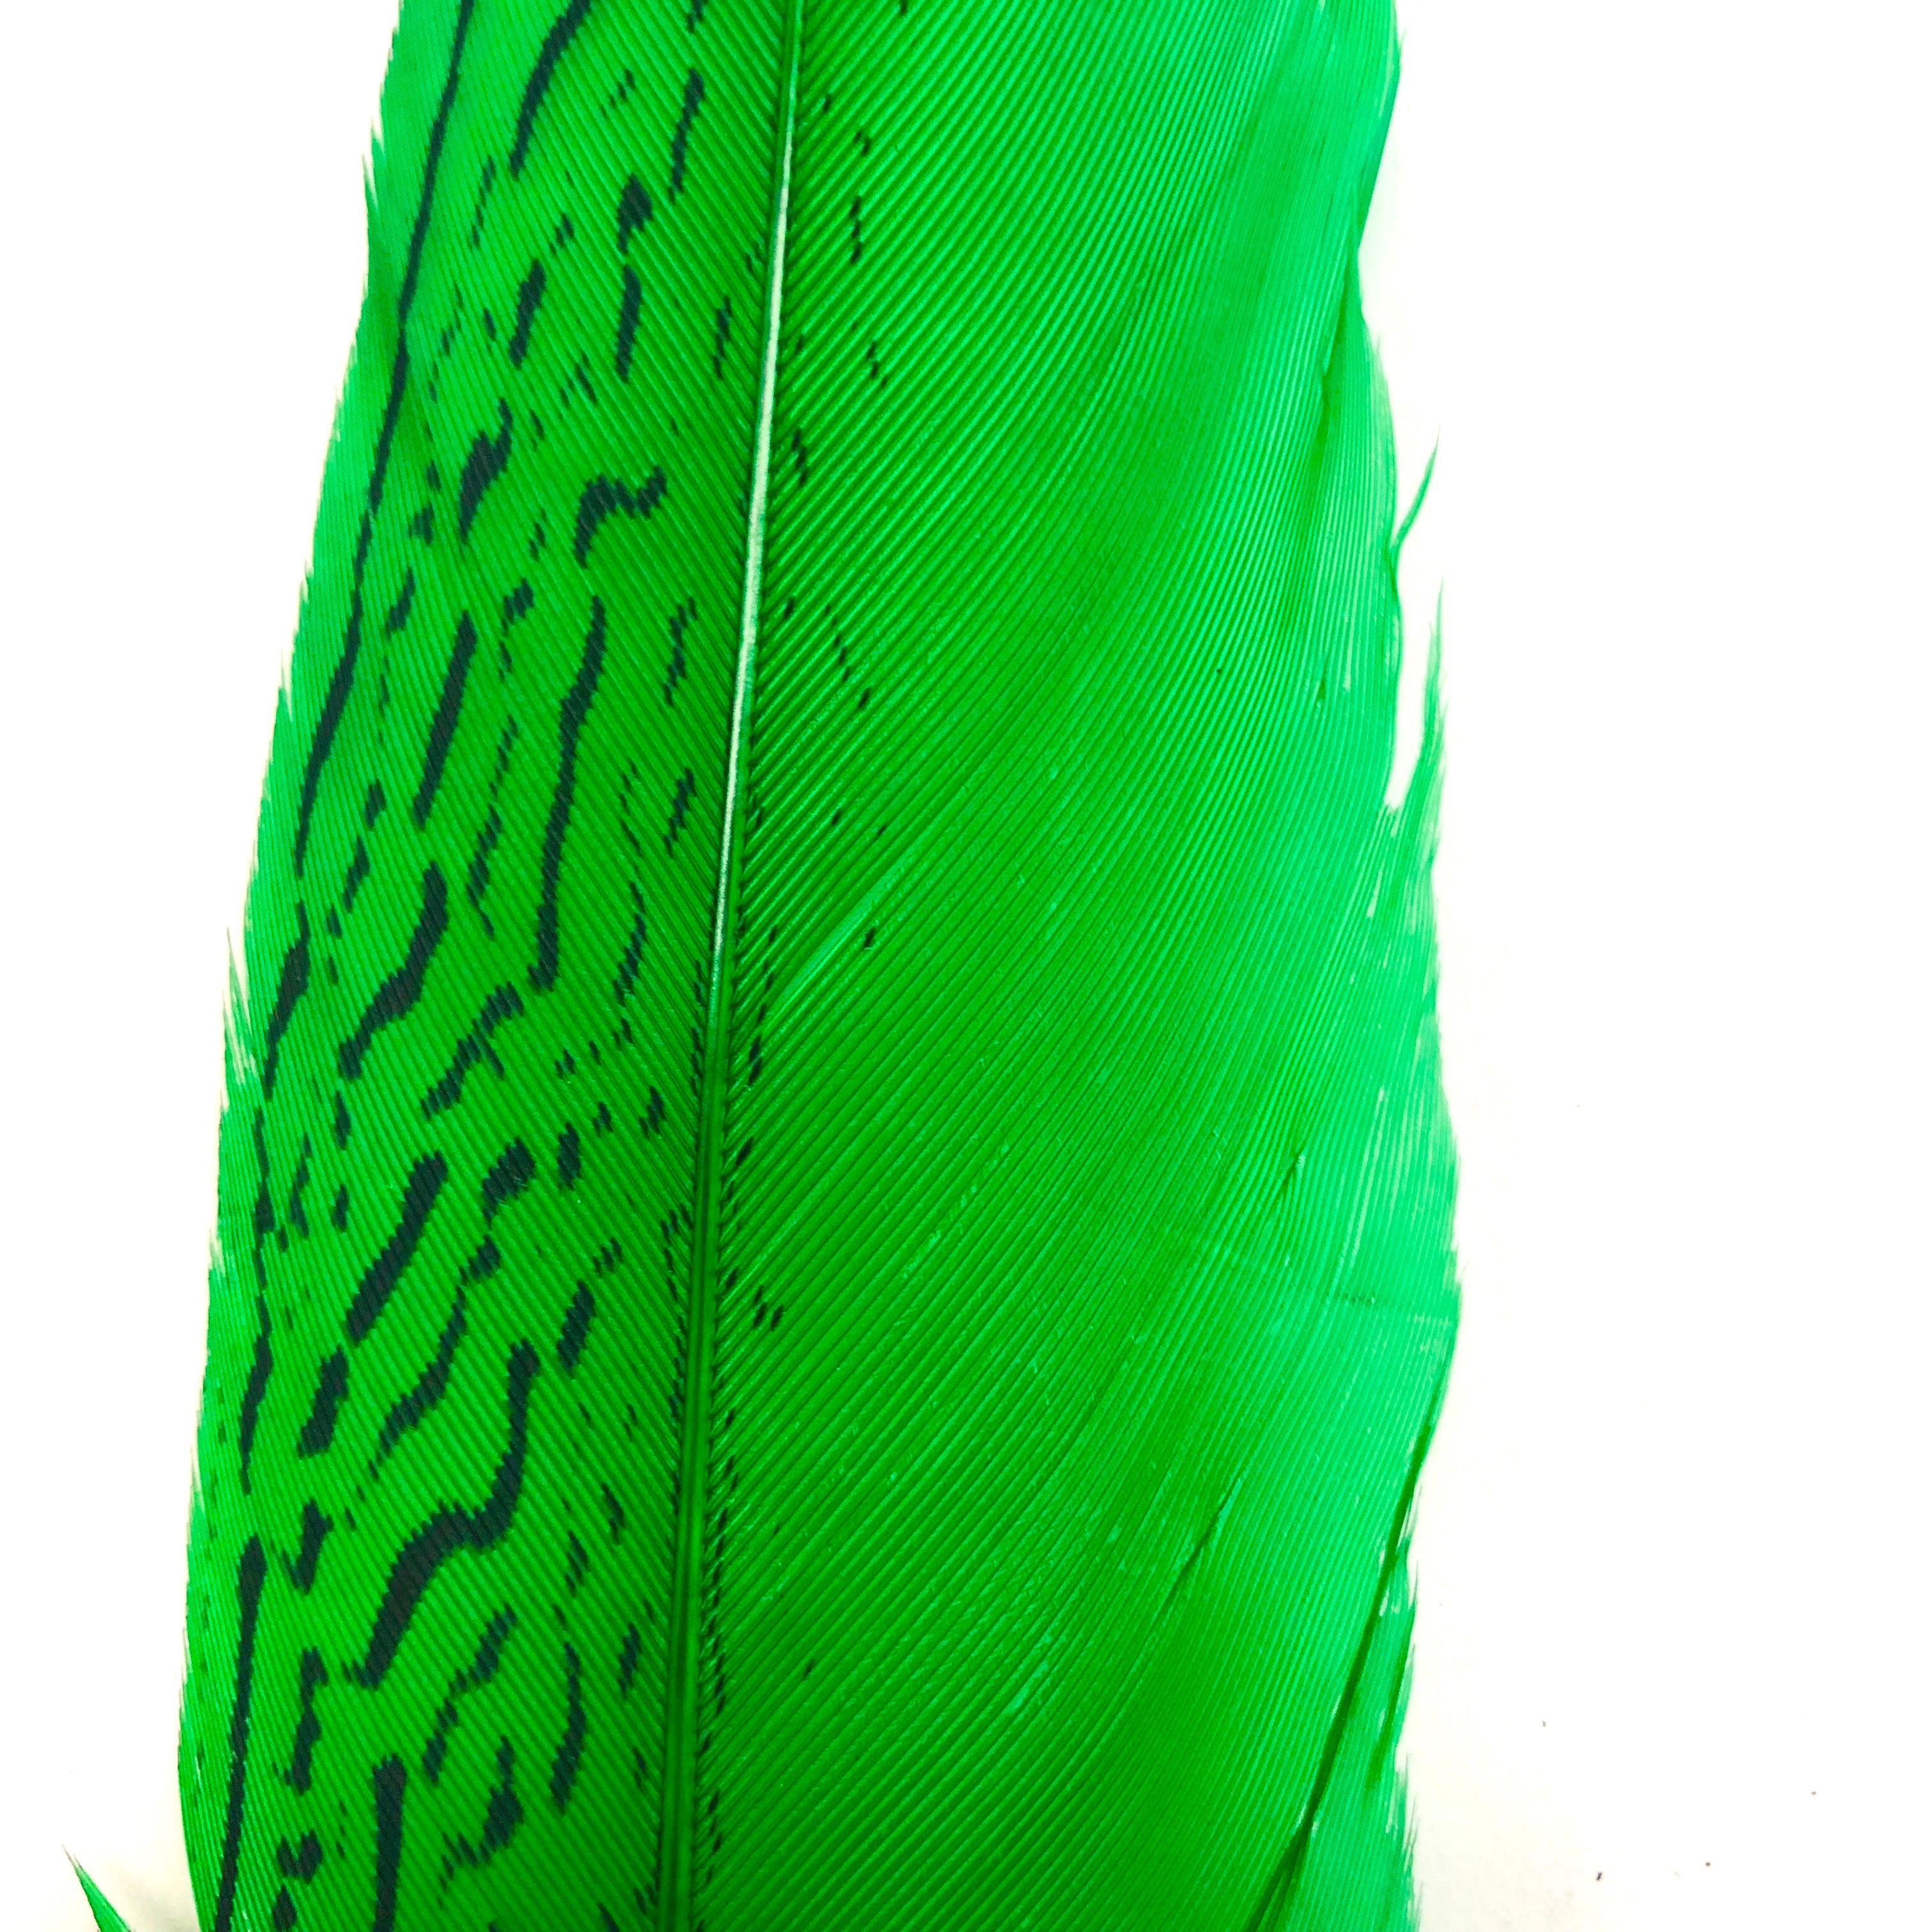 10" to 20" Silver Pheasant Tail Feather - Green